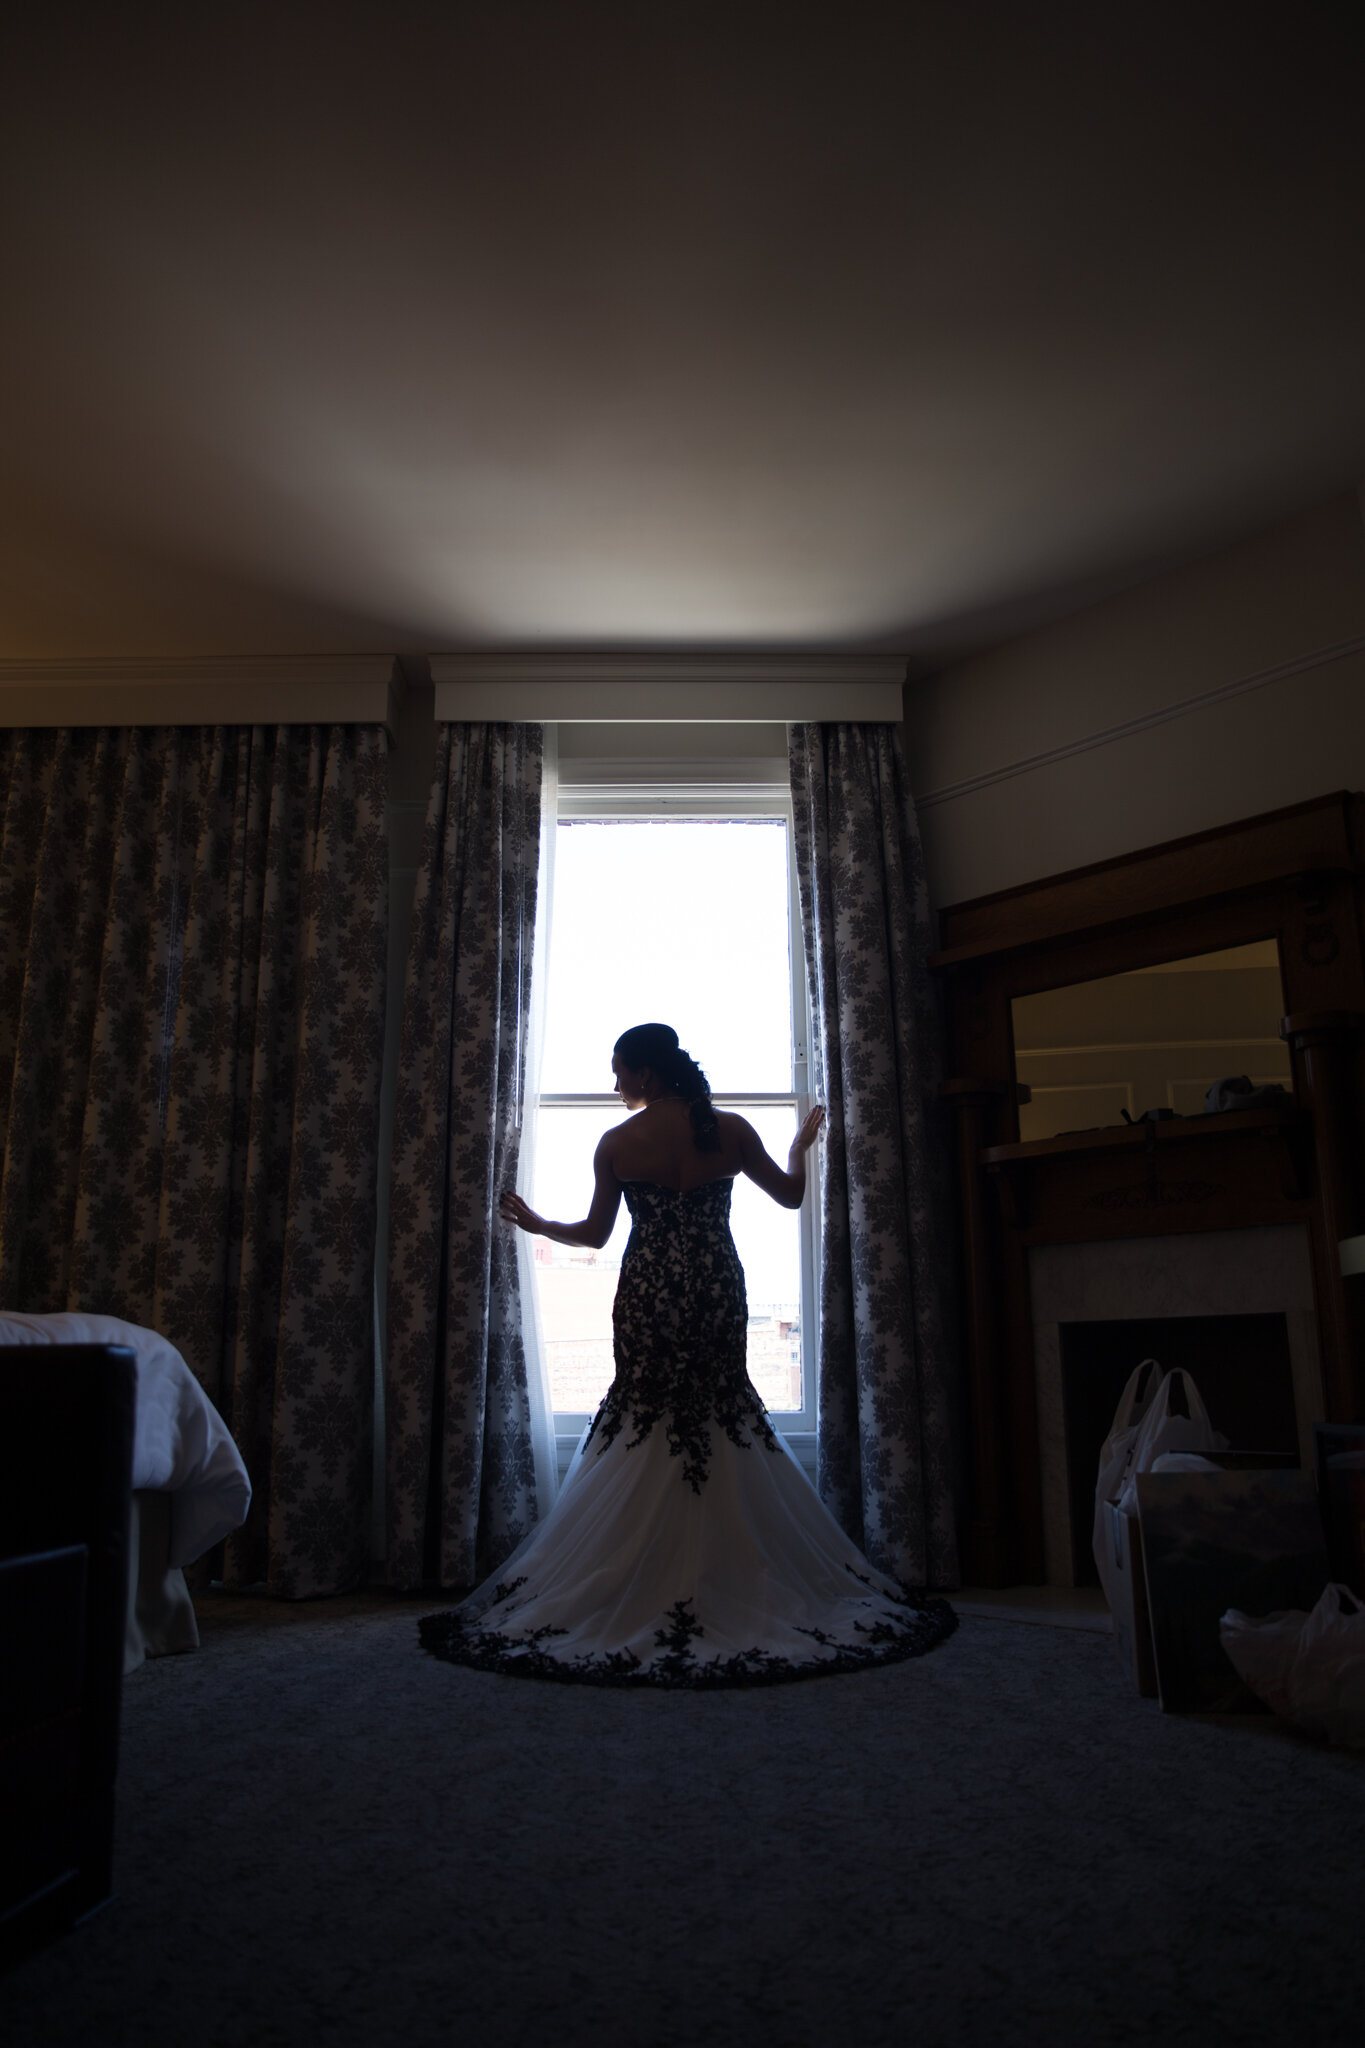  Downtown Denver Oxford Hotel Wedding Photographed by JMGant Photography 